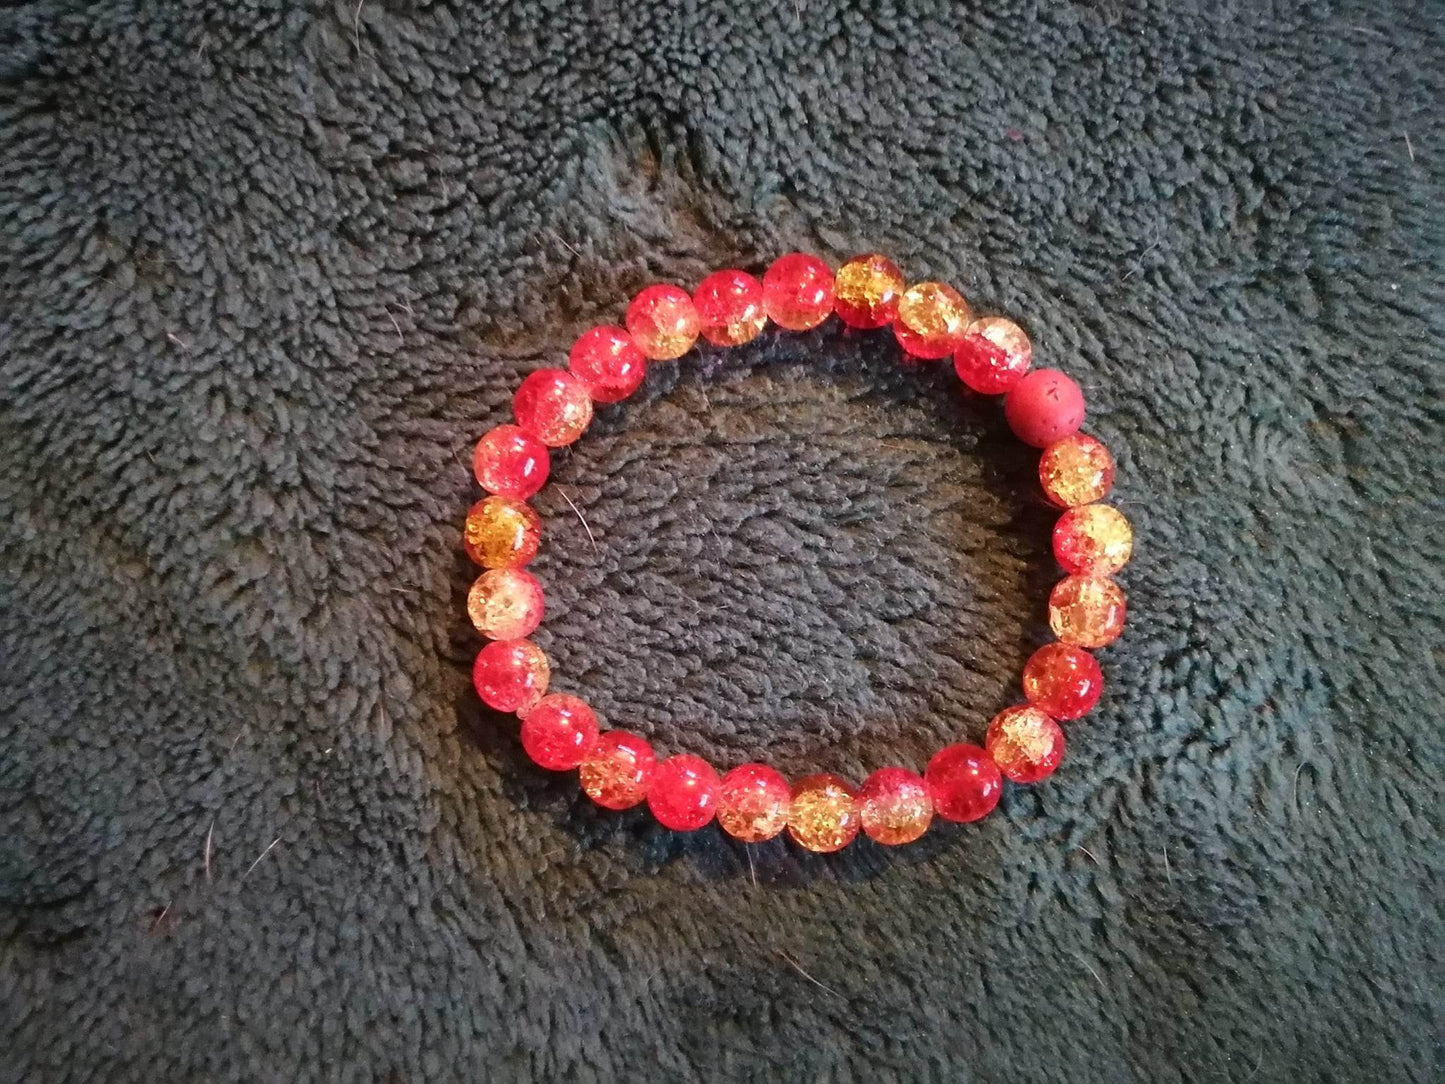 Brass N' Beads Red Cracked Beads & Lava Rock Bracelet / Size Large / Large Beads ( Ready to Ship / 7C )